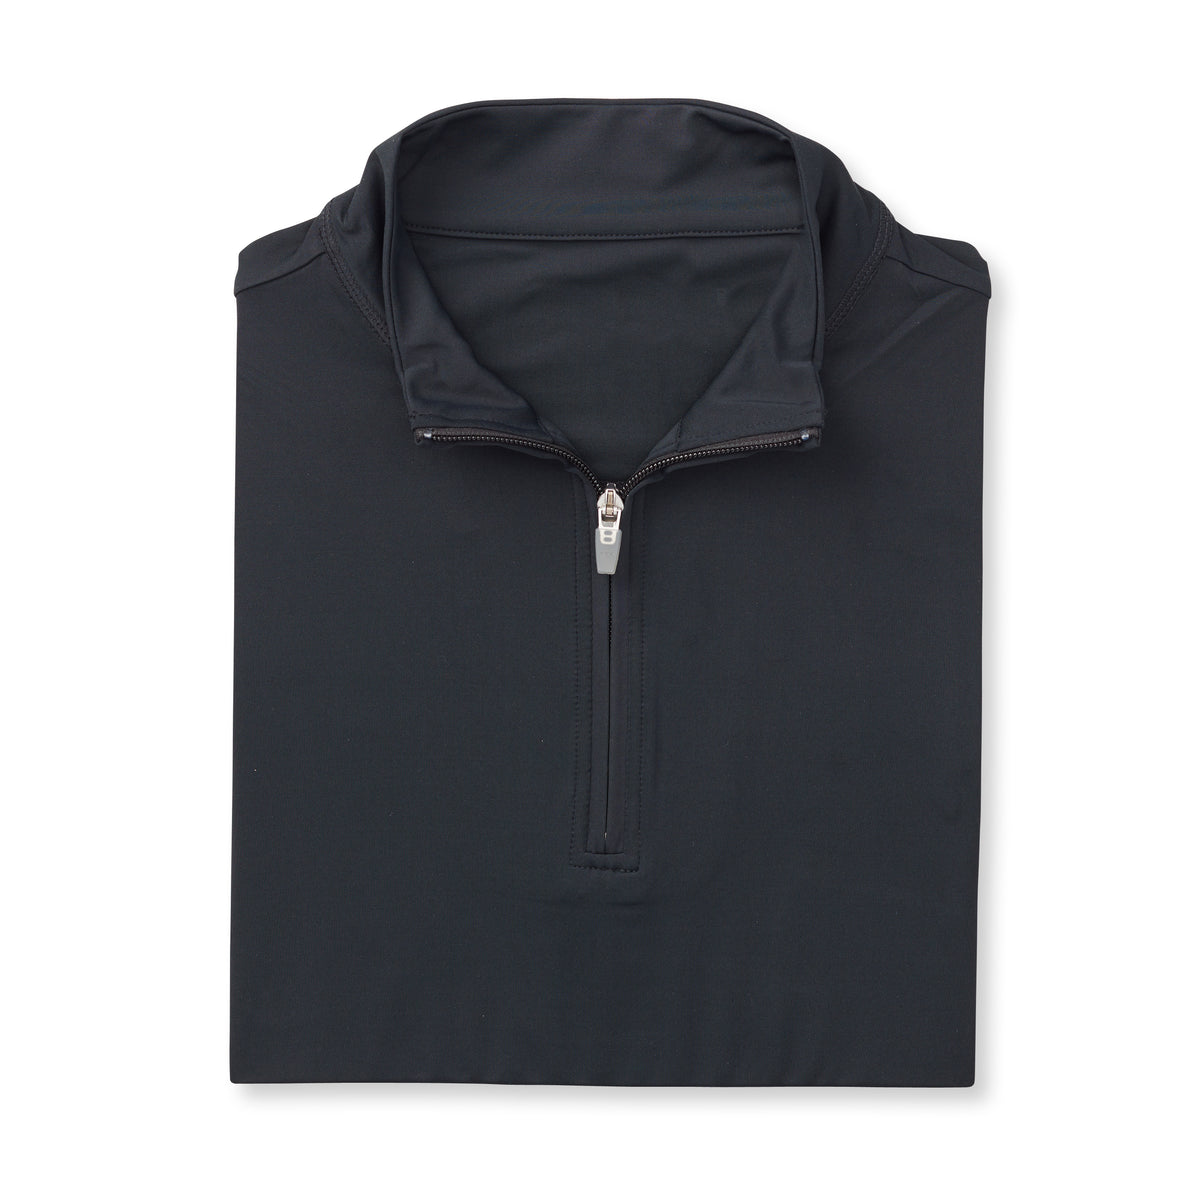 THE CLASSIC LONG SLEEVE HALF ZIP PULLOVER - Black